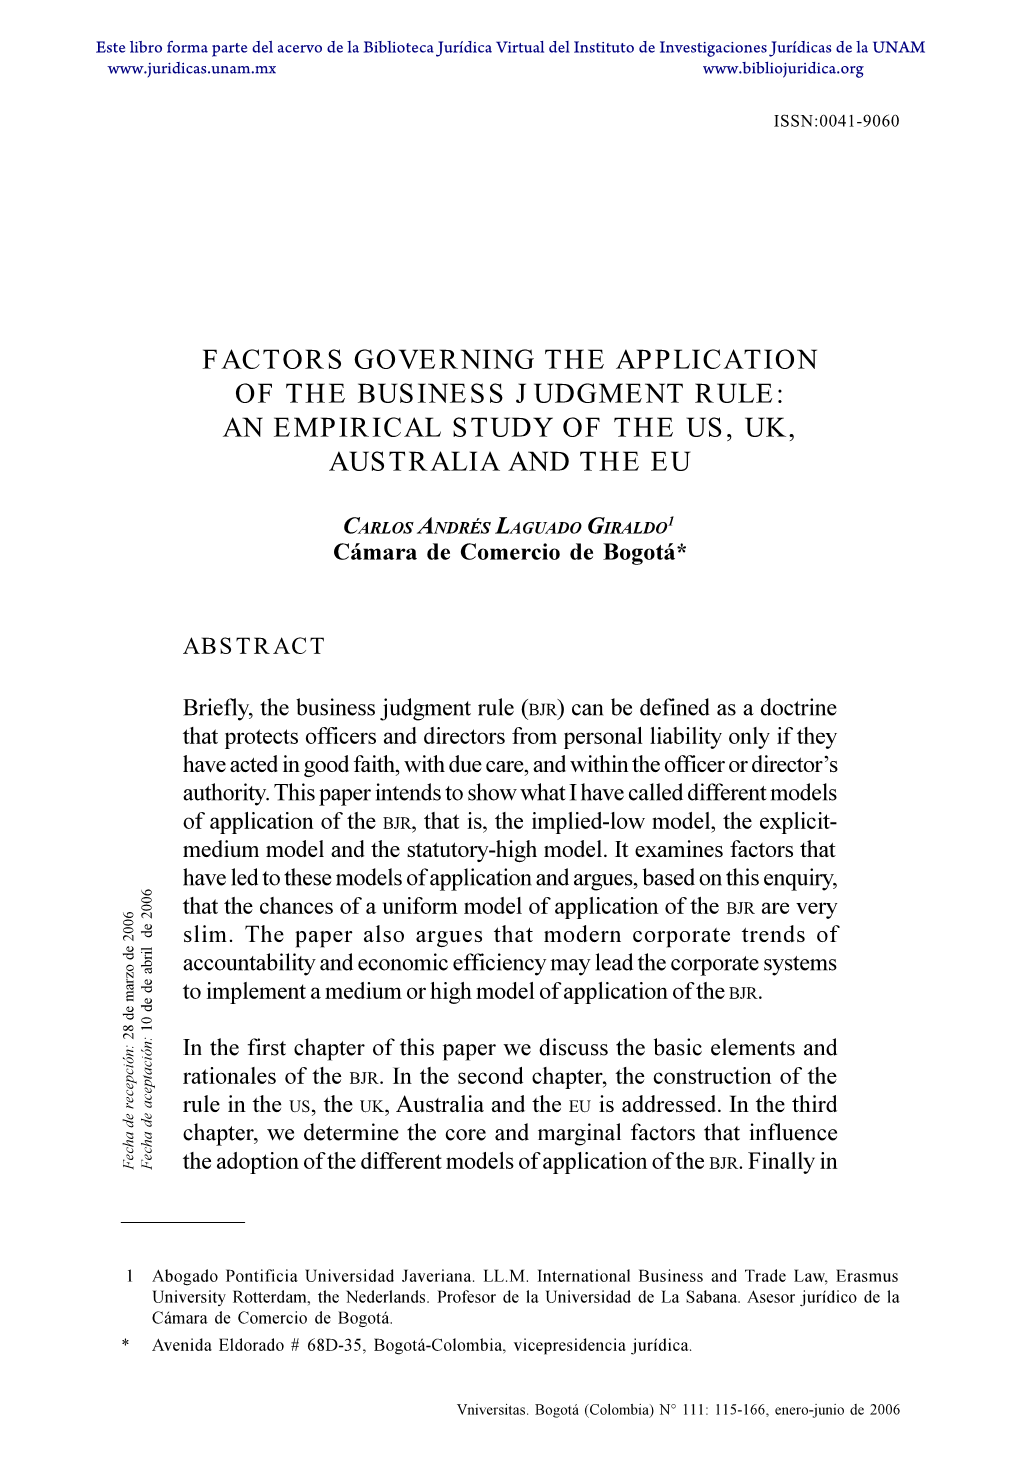 Factors Governing the Application of the Business Judgment Rule:Issn:0041-9060